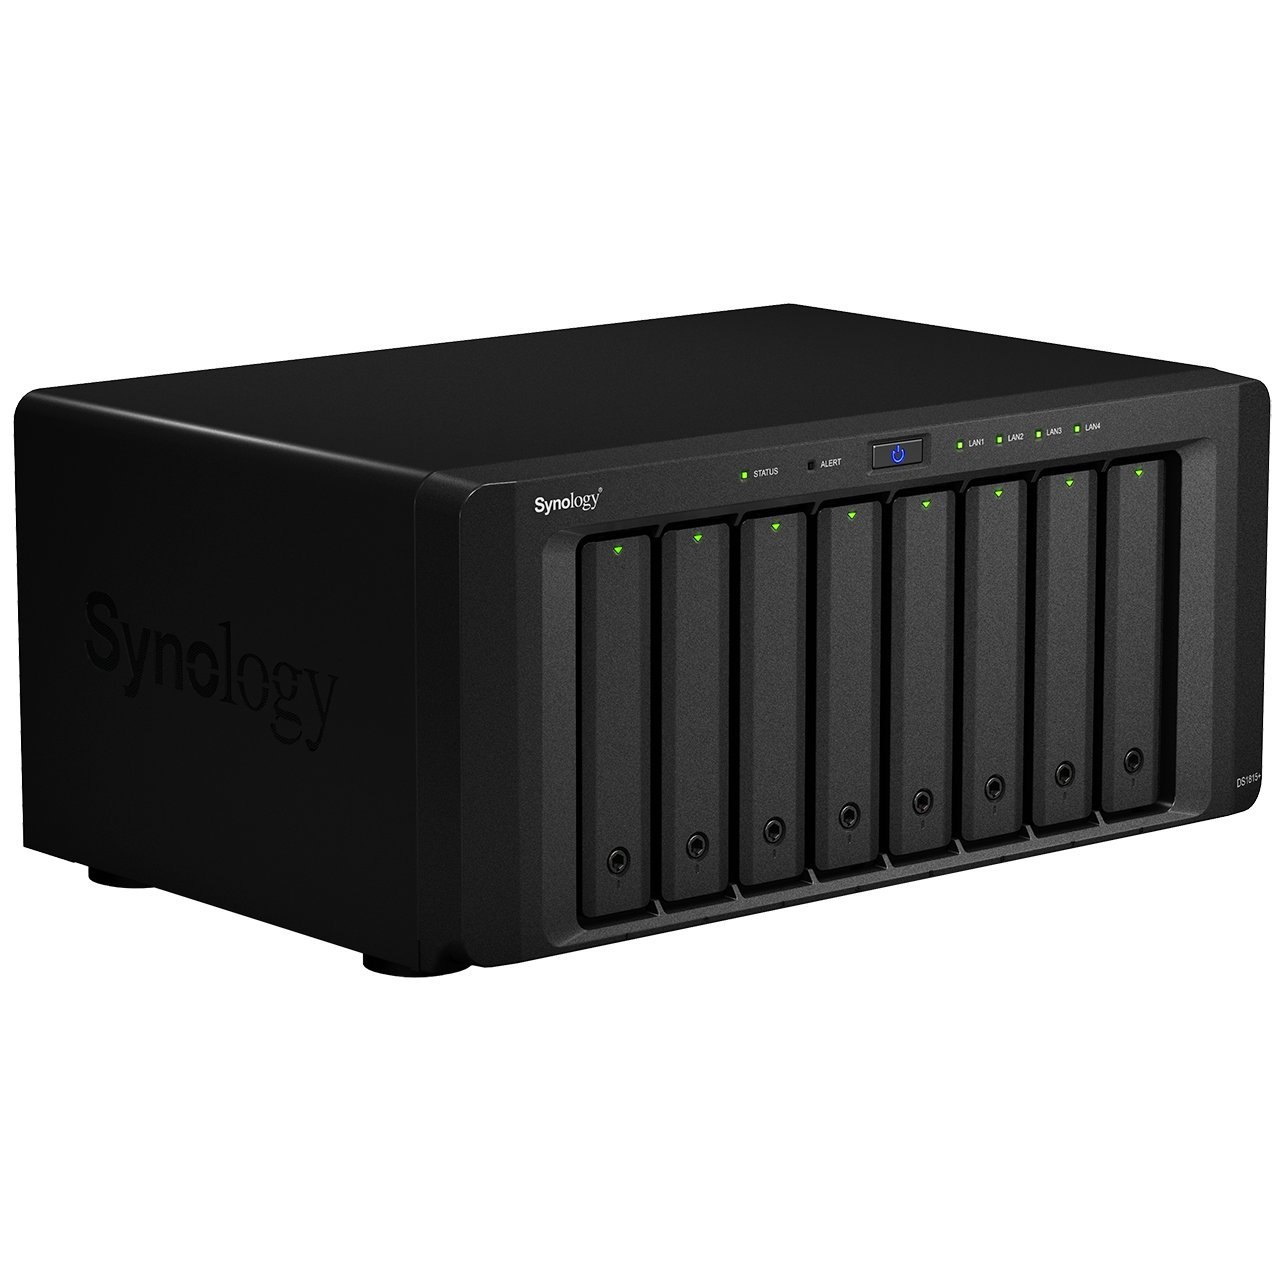 NAS Synology DS1815+ solo 407€